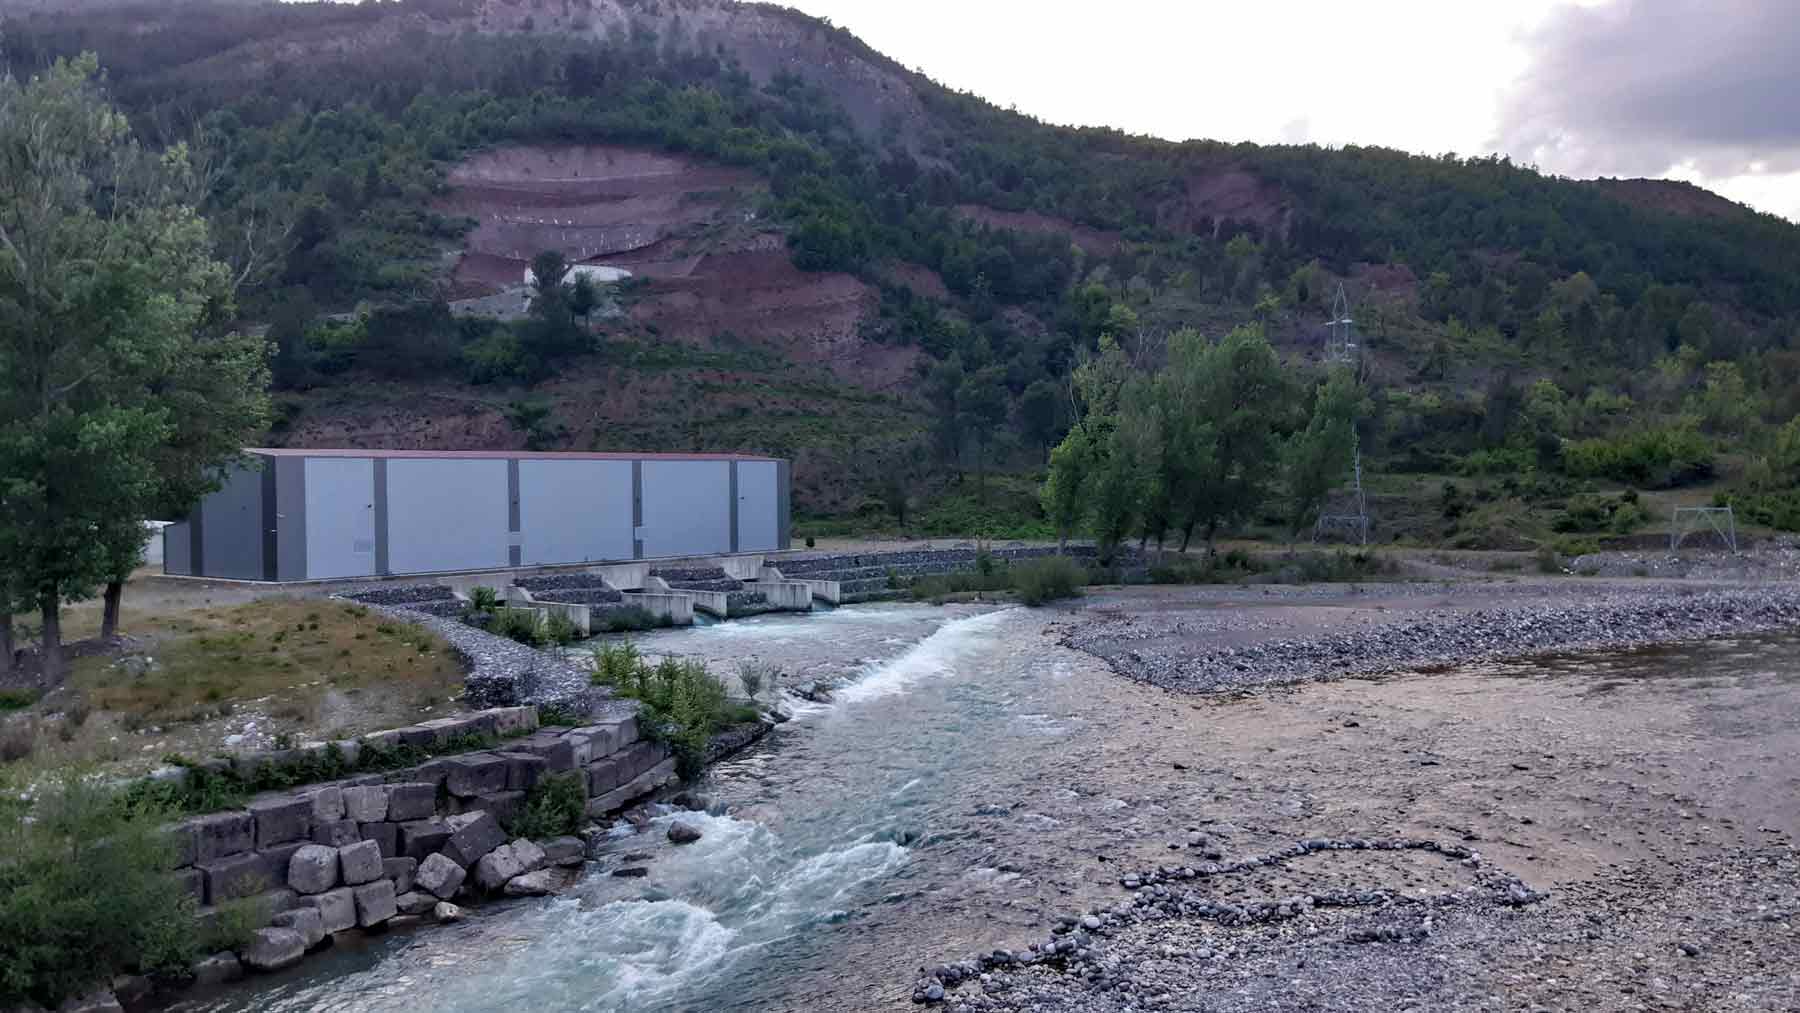 The-dam-interrupts-the-flow-of-the-river